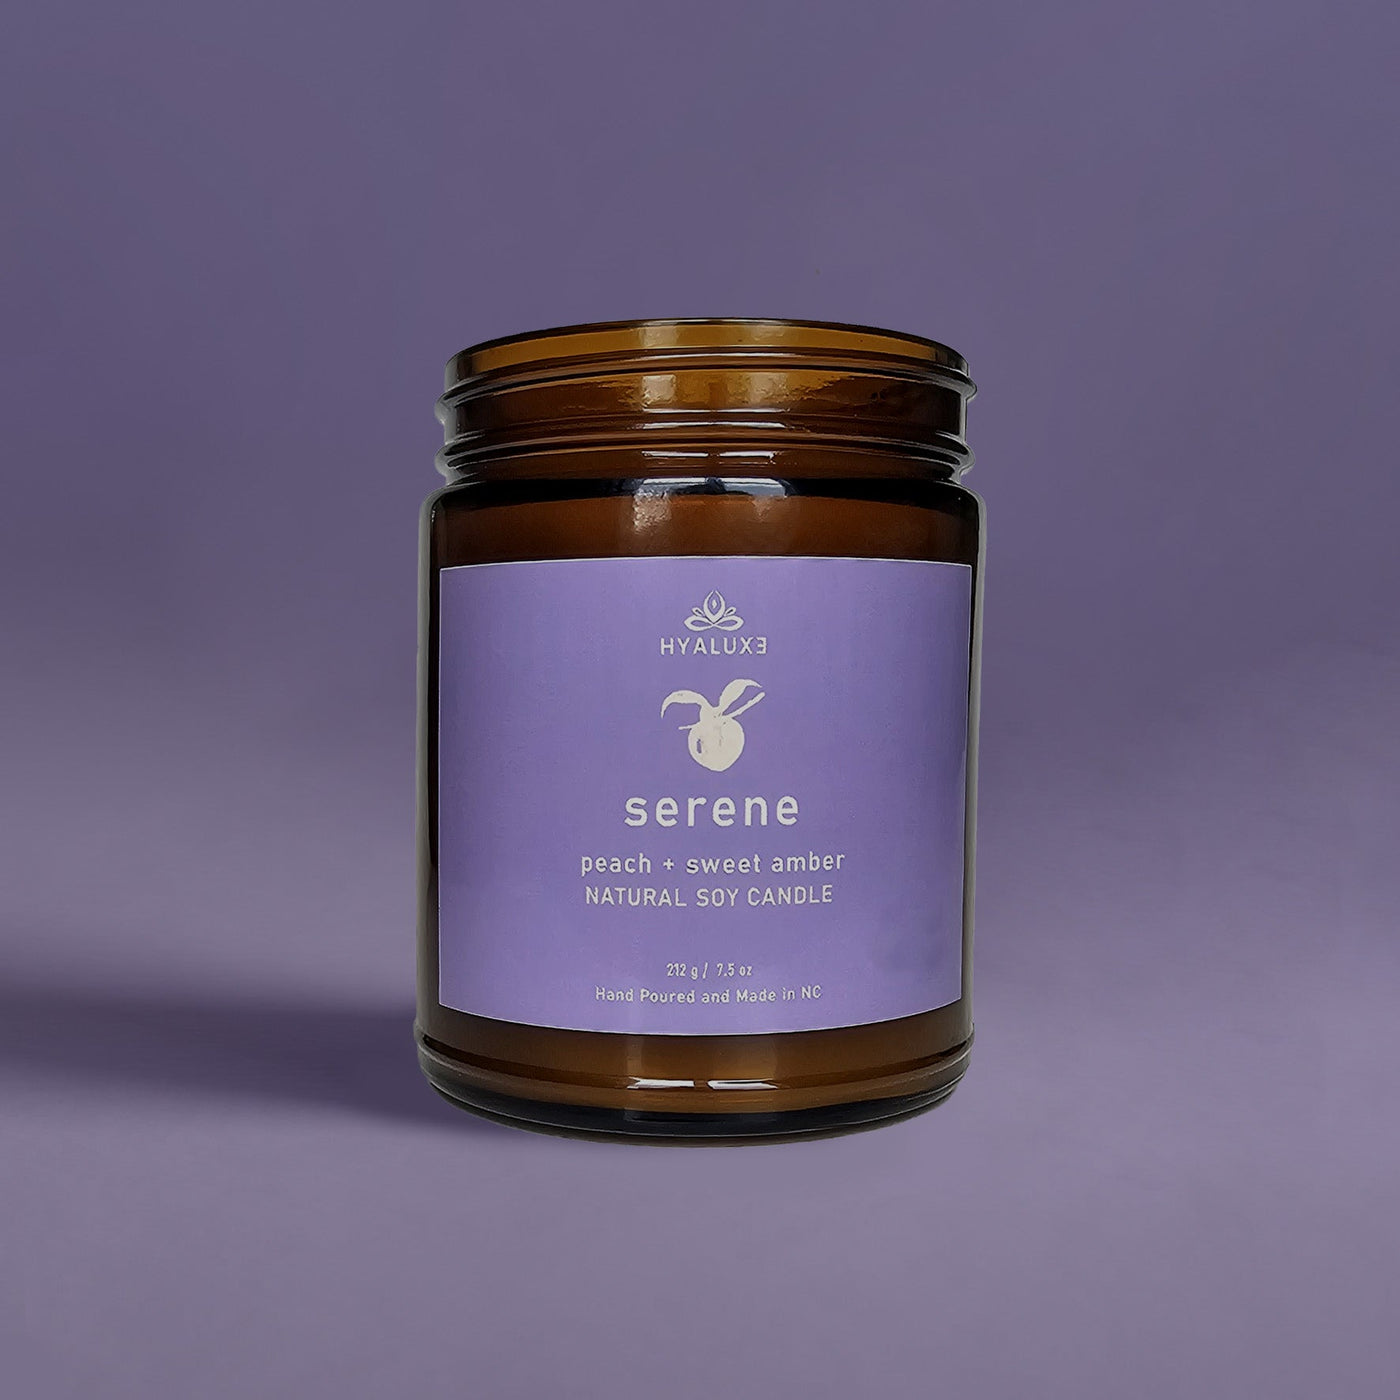 Serene Peach & Amber Natural Soy Candle - Hyaluxe Body